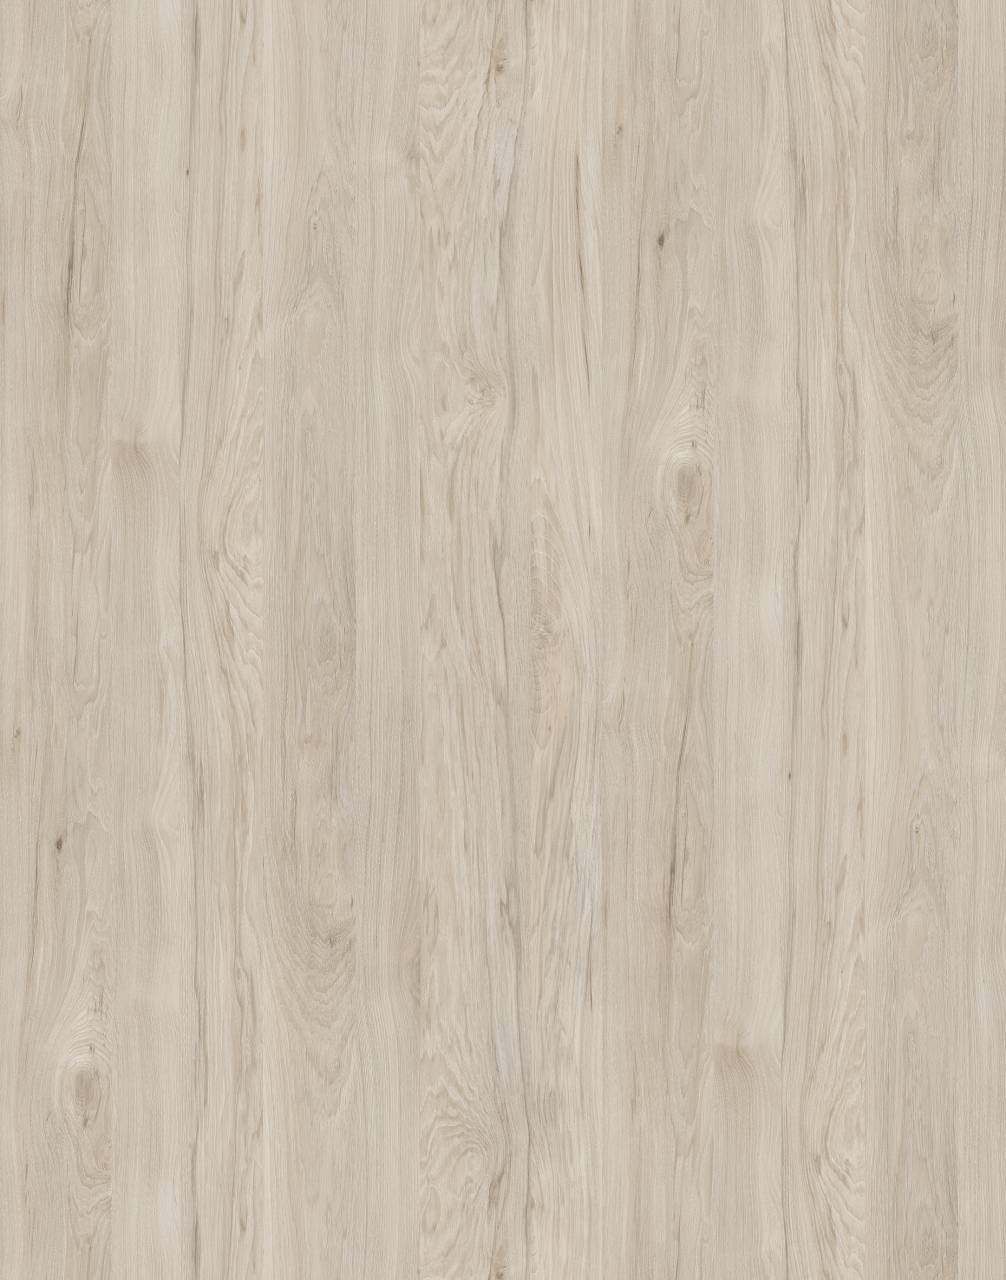 Light Rockford Hickory PW HPL with textured surface and warm light brown tones for a welcoming and natural look.